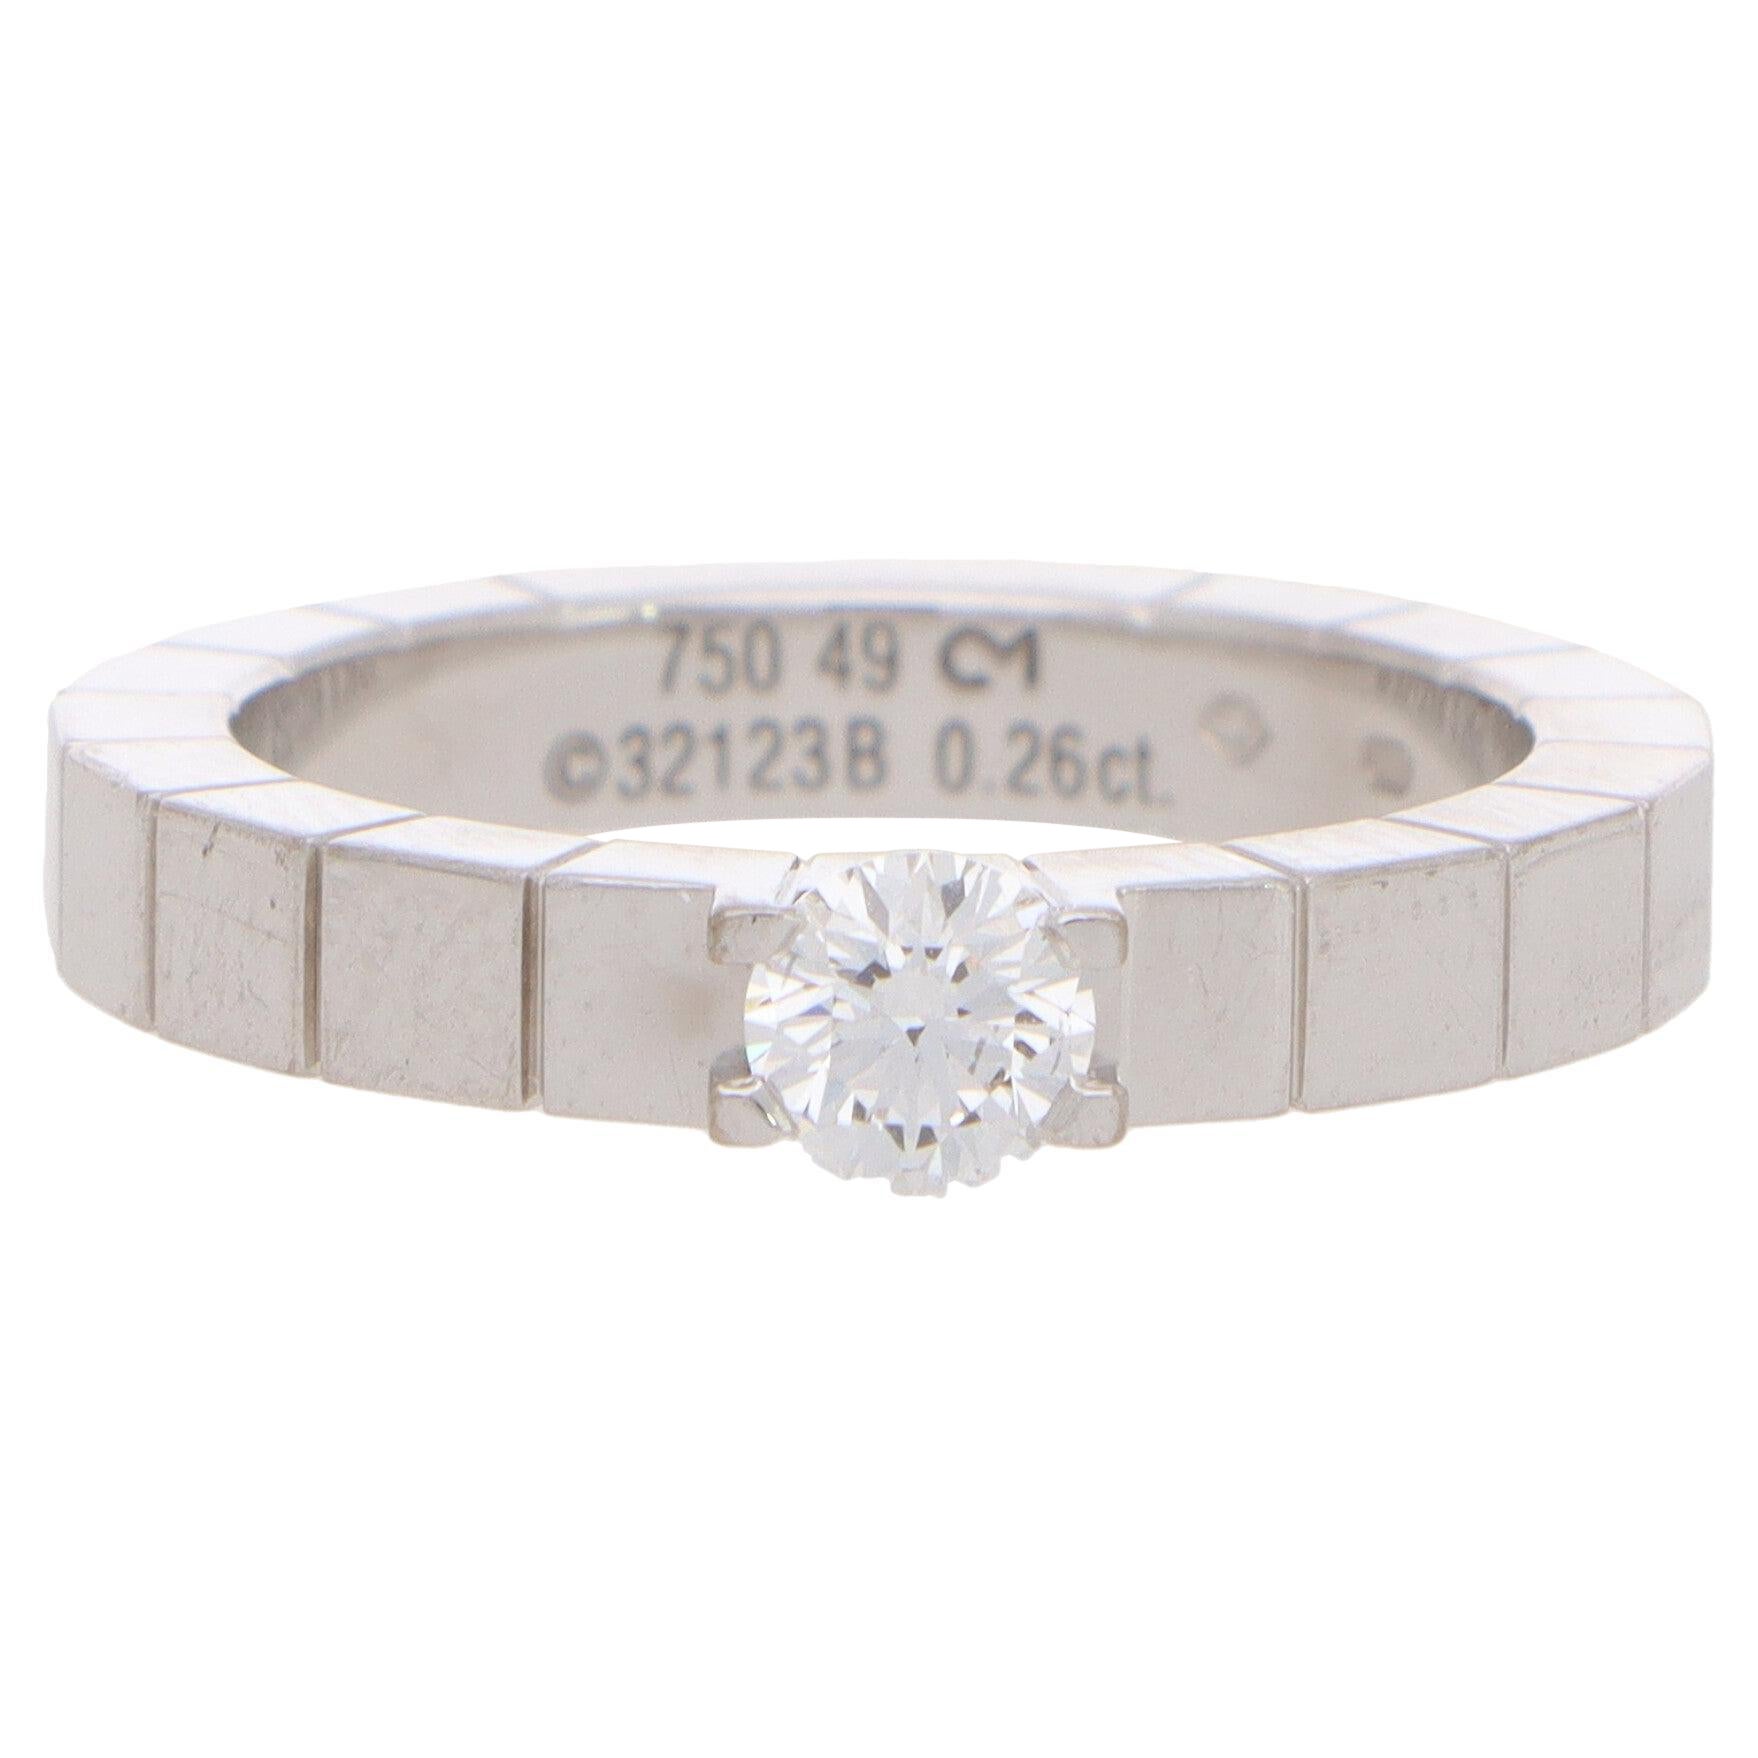 Certified Vintage Cartier Lanières Solitaire Diamond Ring Set in 18k White Gold For Sale